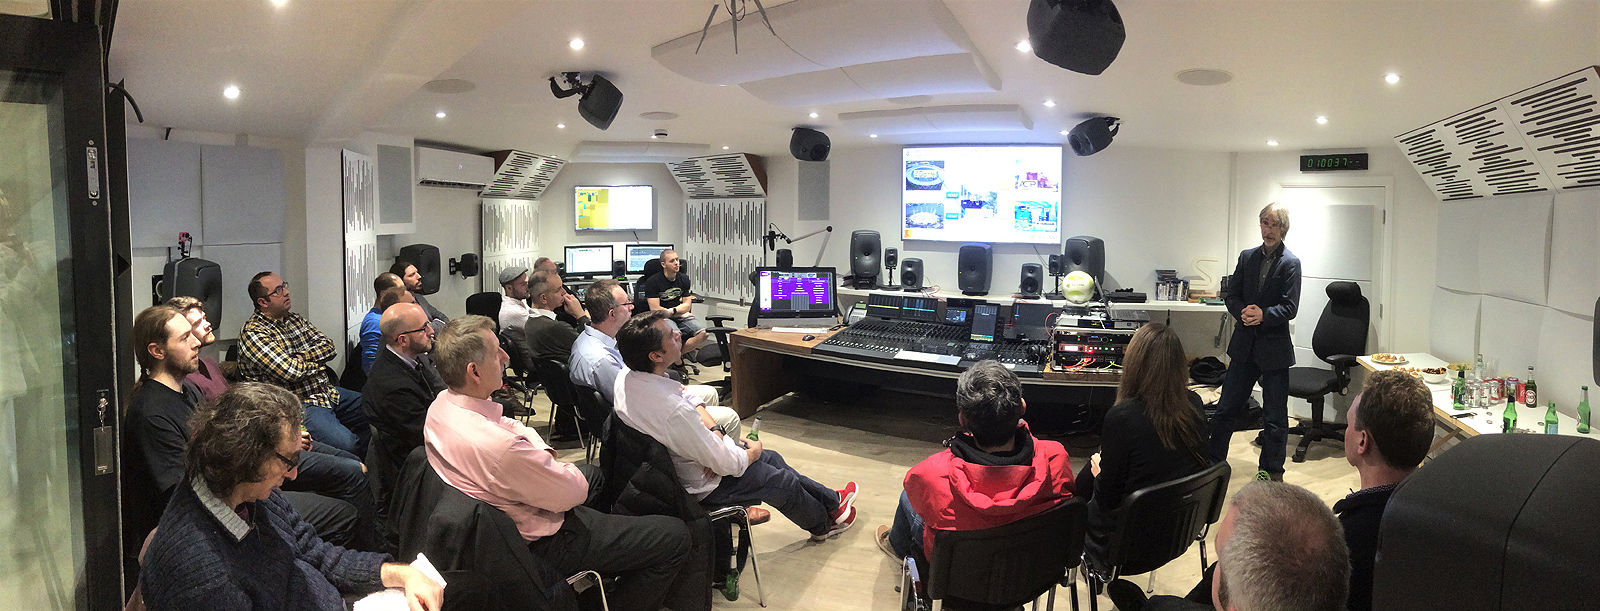 The event was hosted by RAVENNA and Genelec at Genelec’s London demo facility